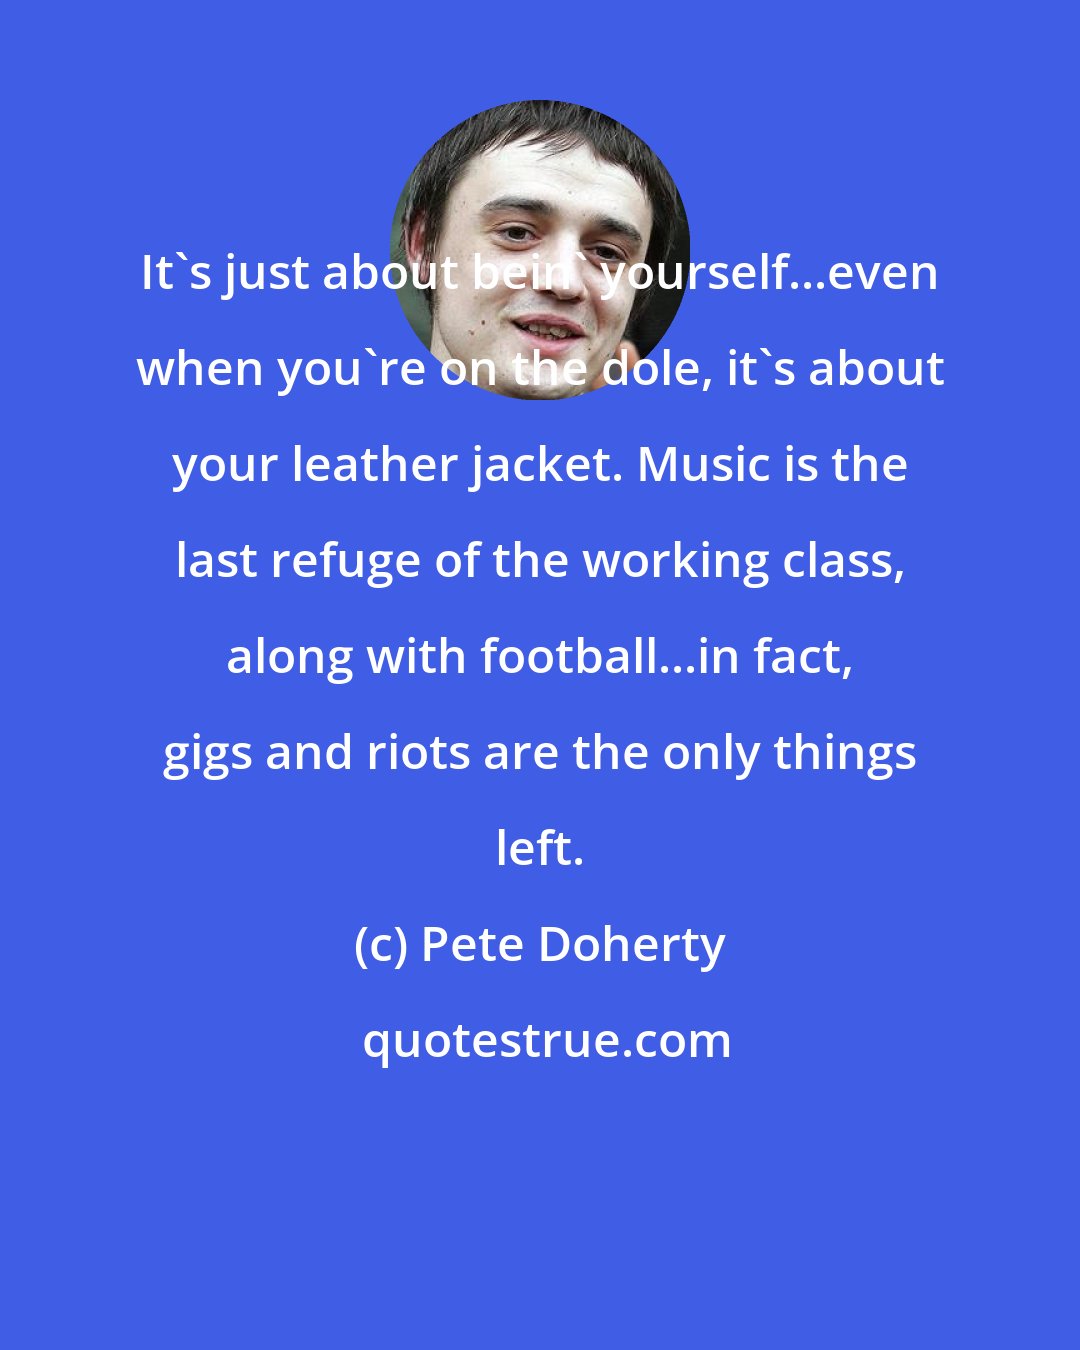 Pete Doherty: It's just about bein' yourself...even when you're on the dole, it's about your leather jacket. Music is the last refuge of the working class, along with football...in fact, gigs and riots are the only things left.